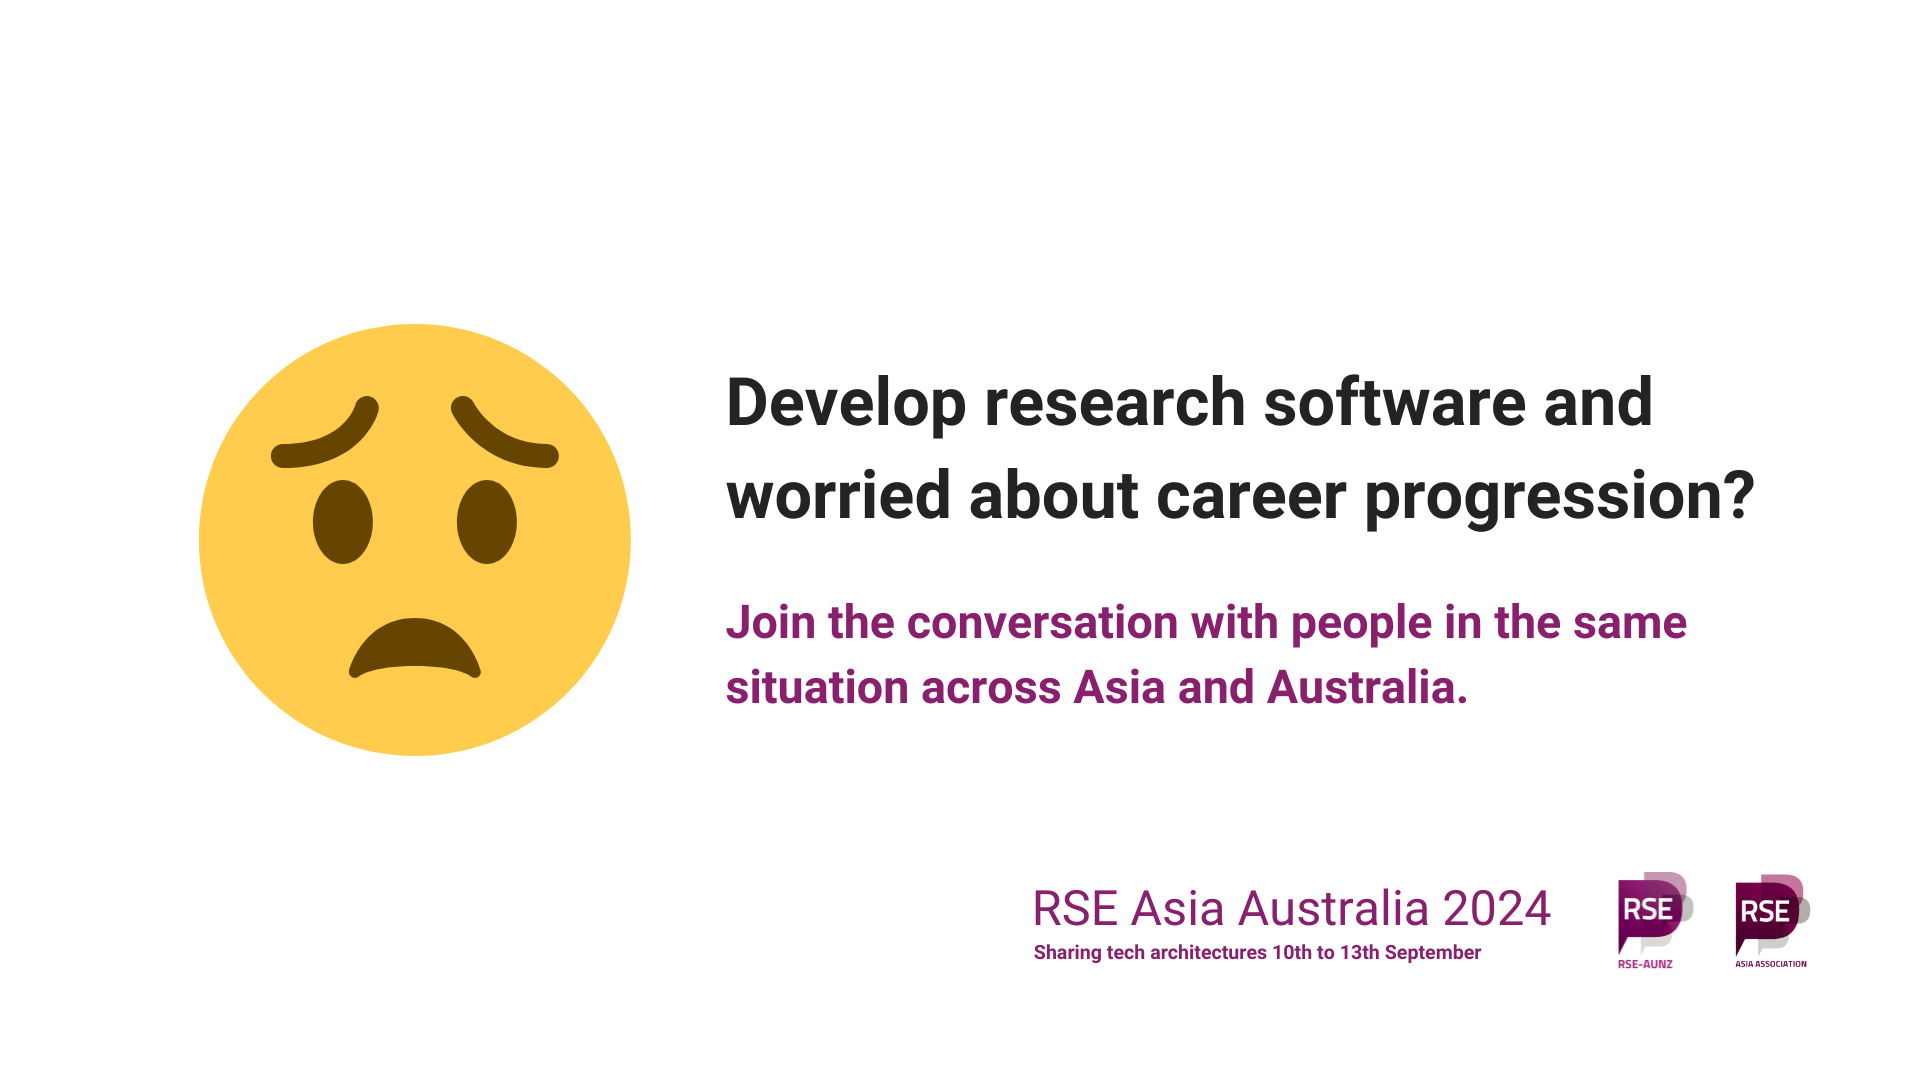 Worried face emoji. Develop research software and worried about career progression? Join the conversation with people in the same situation across Asia and Australia. RSE Asia Australia 2024. Sharing tech architectures. 10th to 13th September. Logos of RSE AUNZ and RSE Asia.